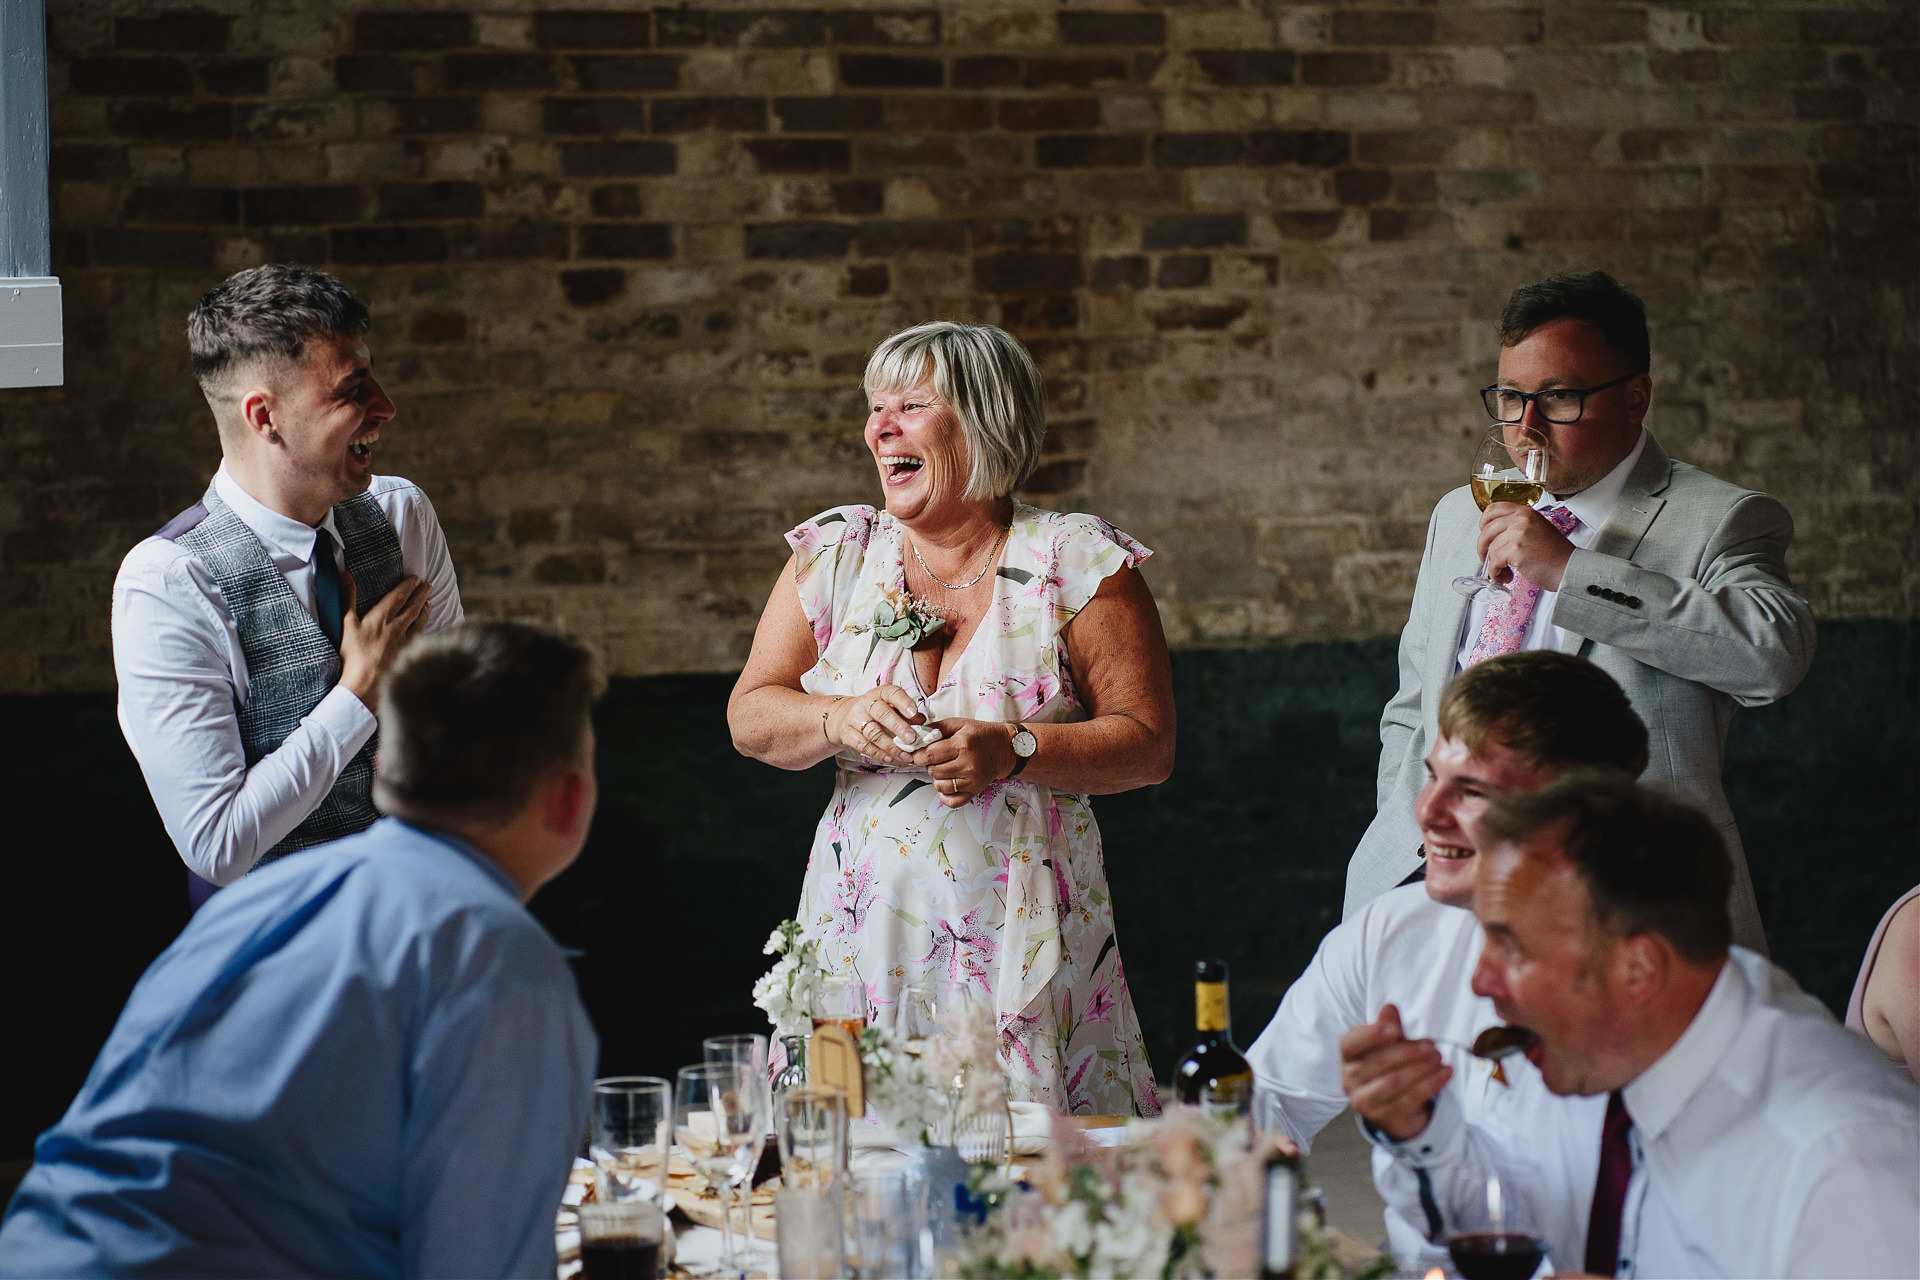 Wedding guests laughing and chatting inside a rustic barn